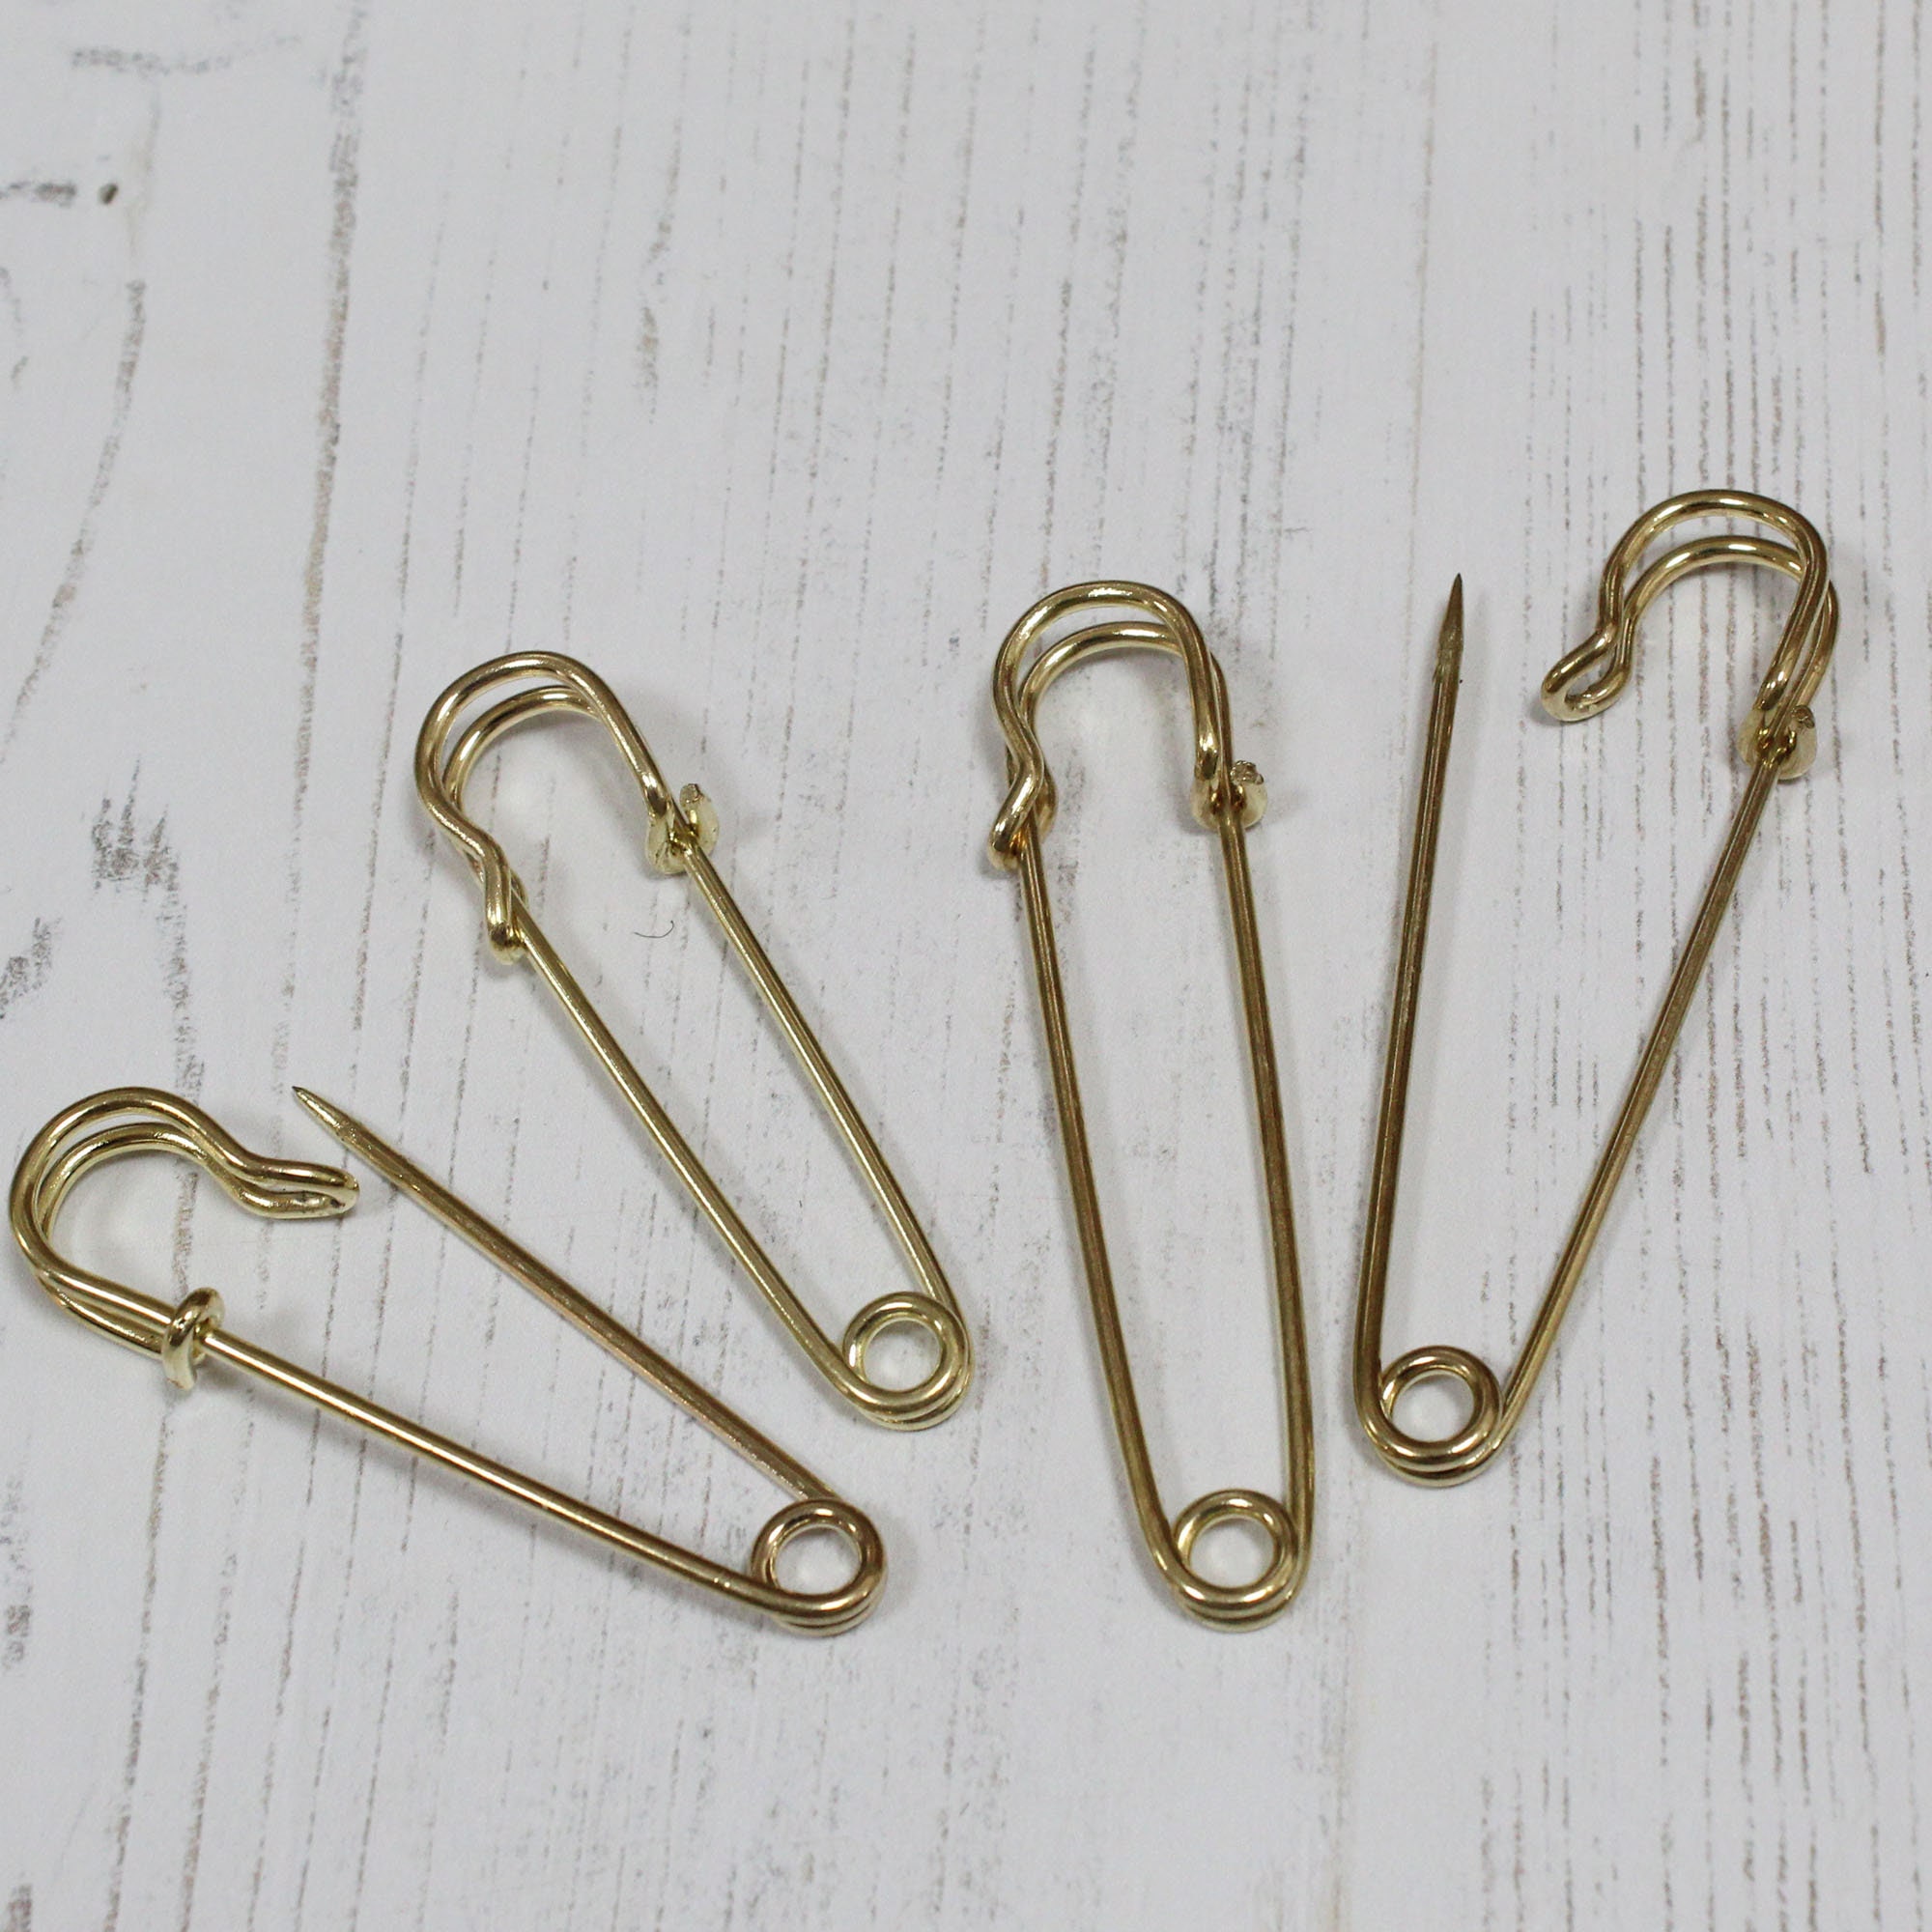 Large Safety Kilt Skirt Blanket Shawl Pins Silver and Gold Coloured 2.5 and  3 Inch 